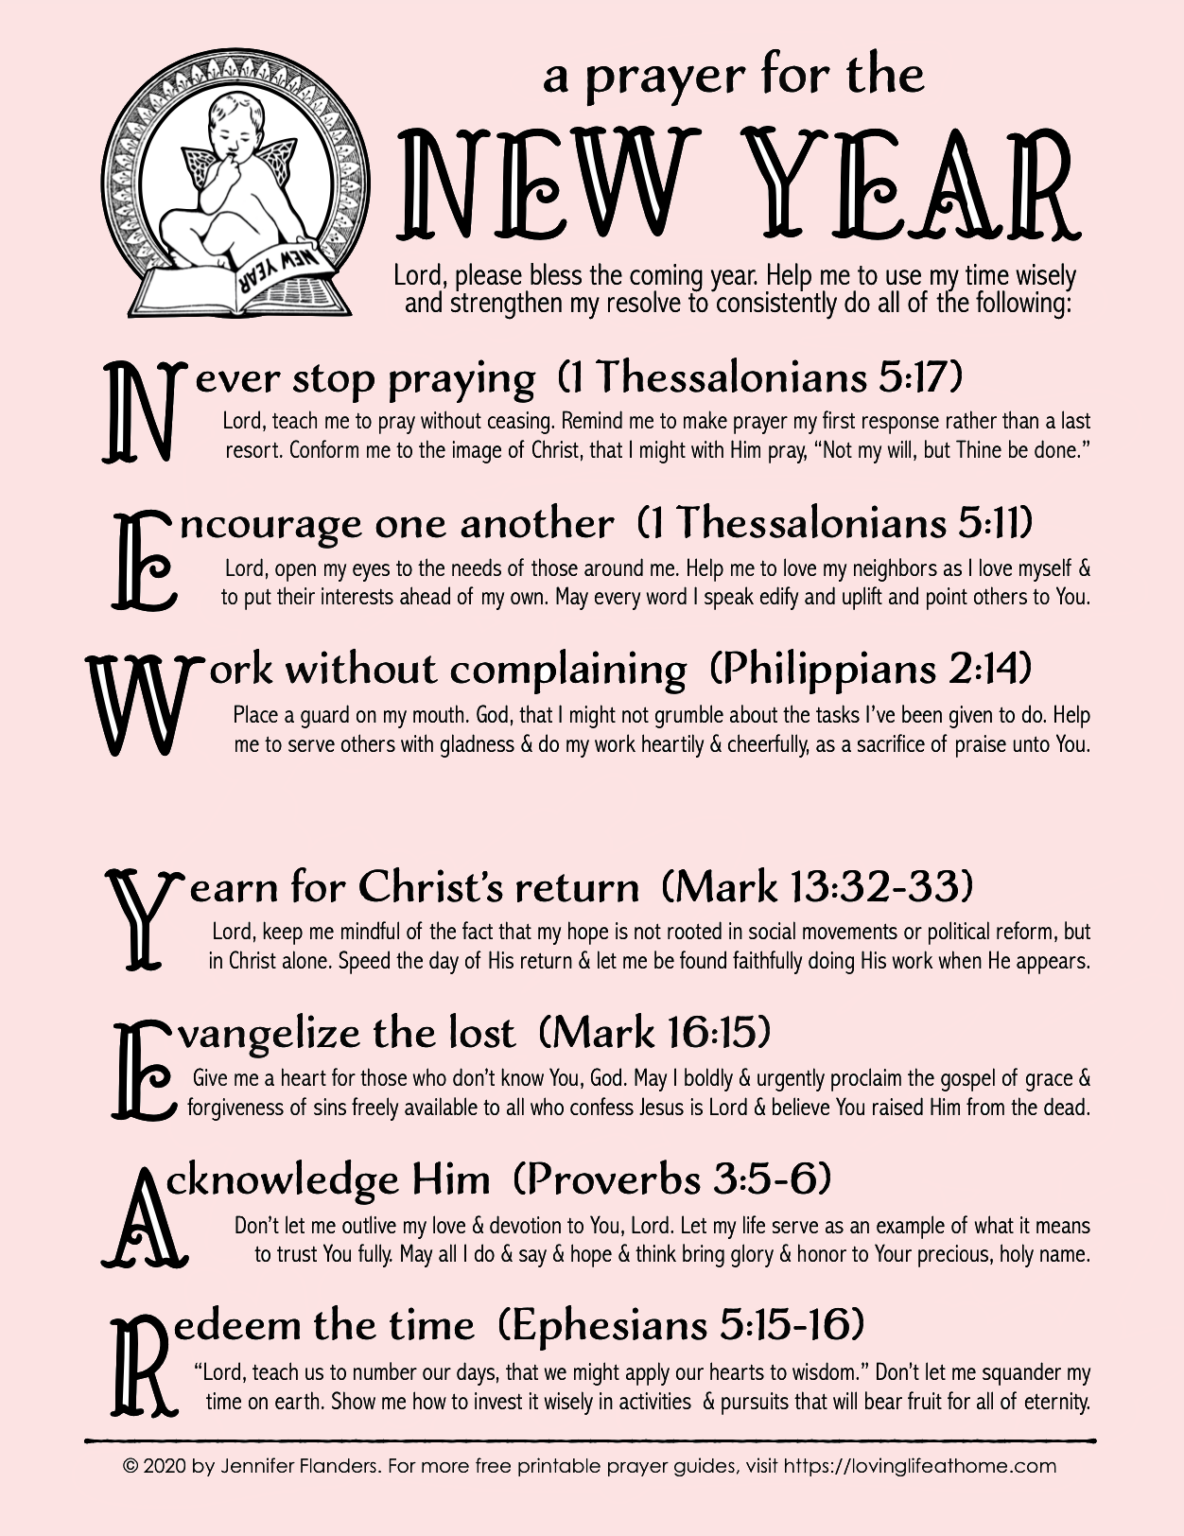 A Prayer for the New Year (Free Printable) Loving Life at Home